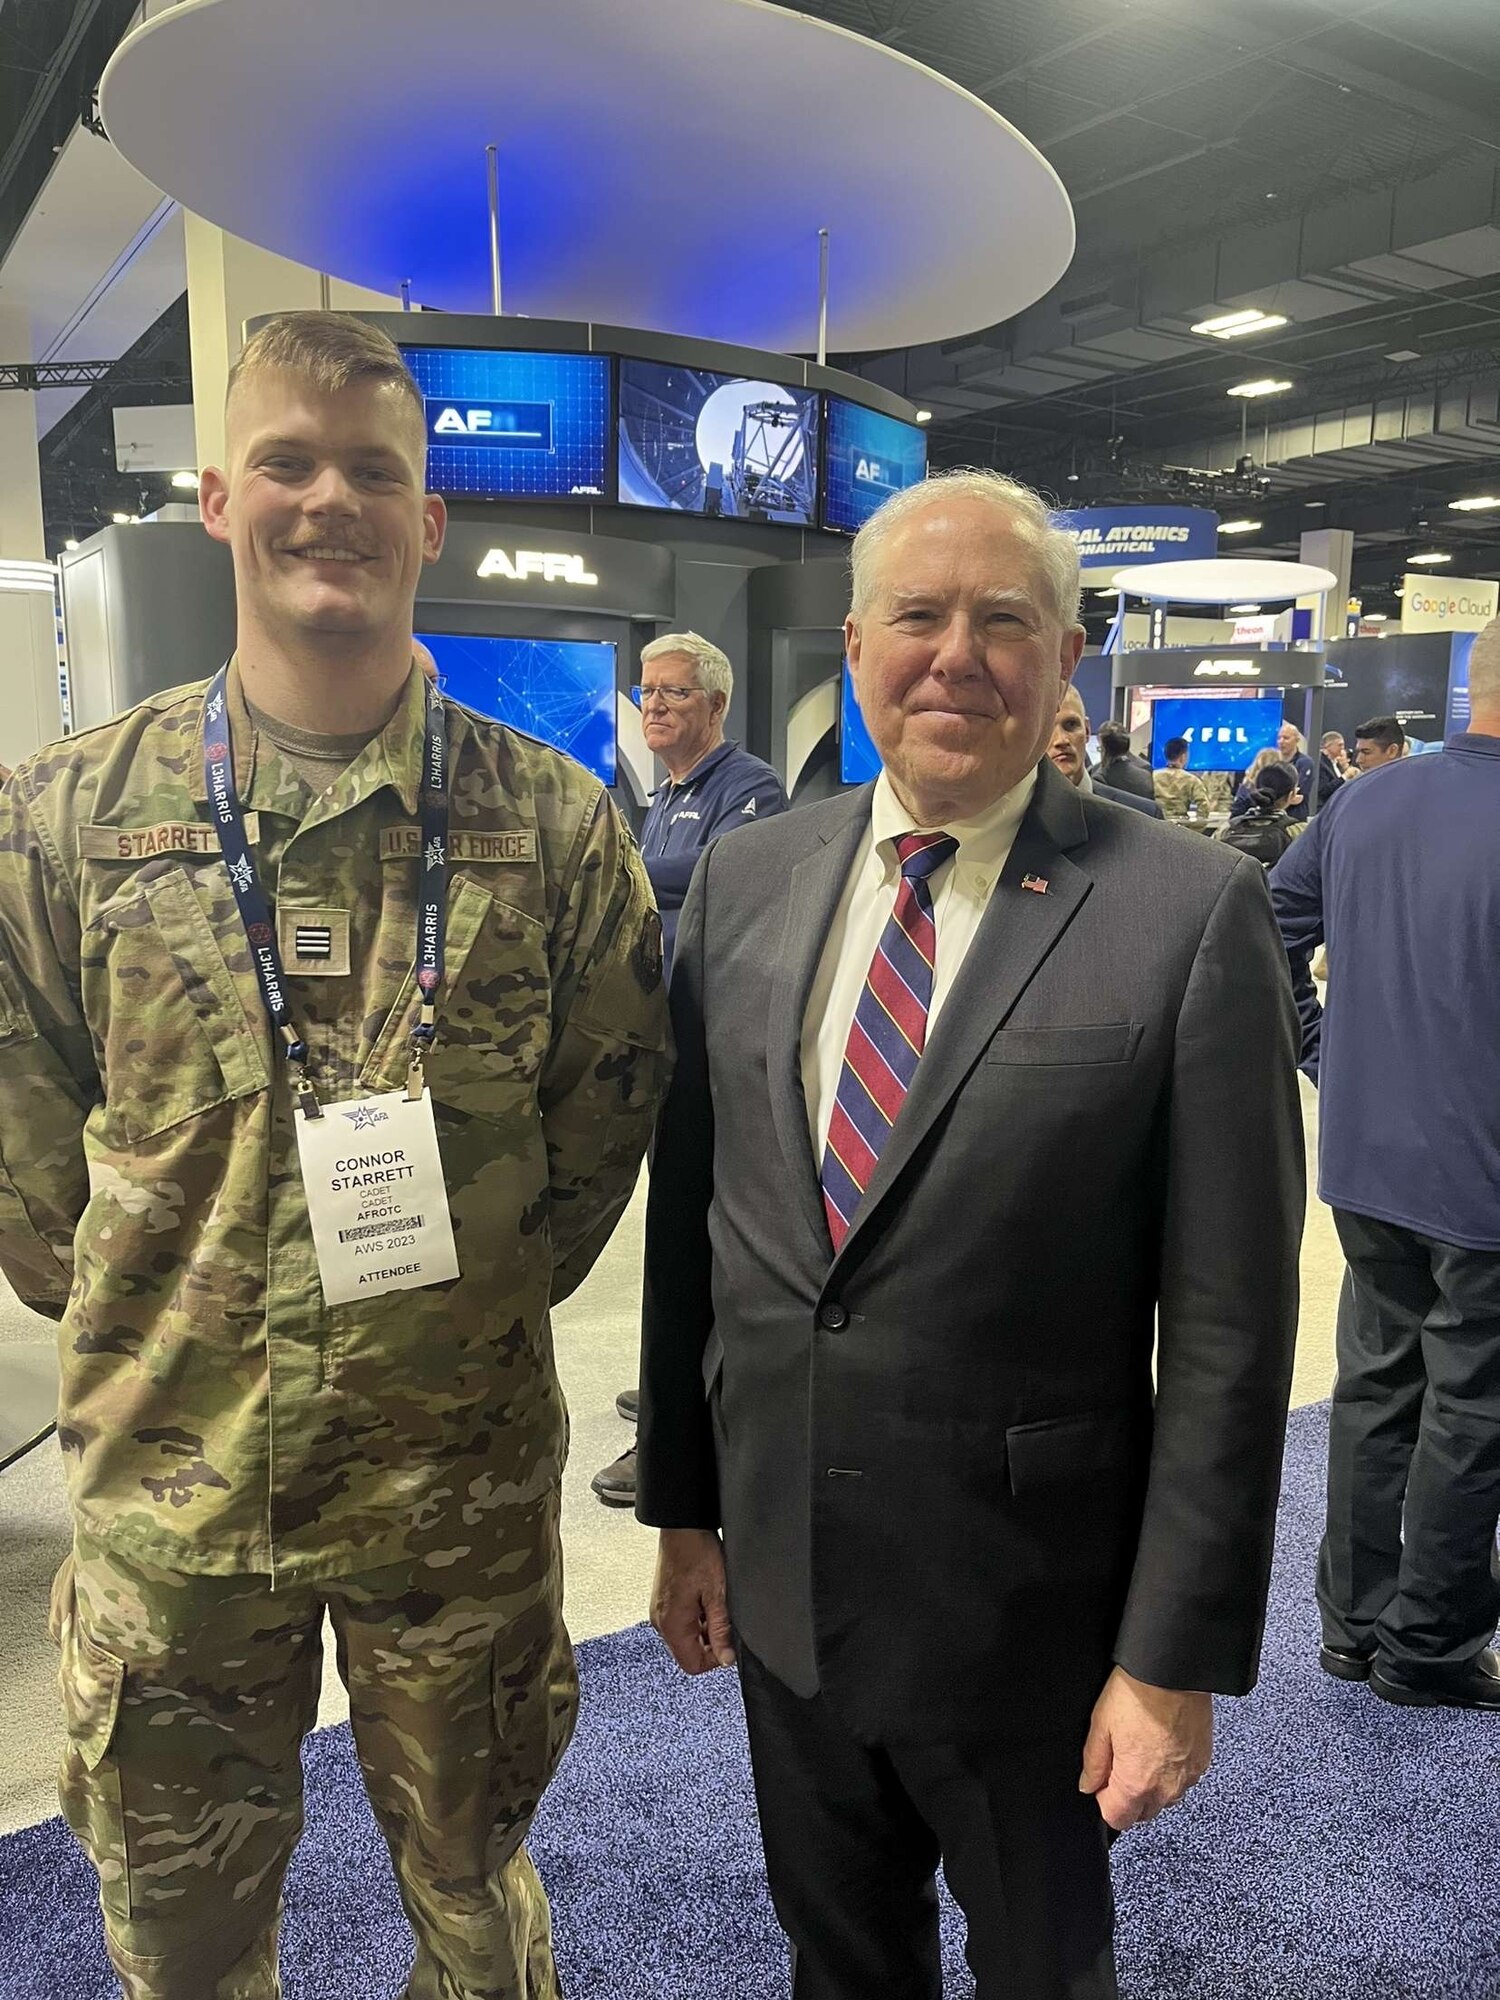 Cadet Connor Starrett from Air Force ROTC Detachment 780 at South Dakota State University meets Secretary of the Air Force Frank Kendall (right) at the Air and Space Forces Association Air Warfare Symposium, Aurora, Colorado, March 6, 2023. Cadets had the opportunity to meet senior Air and Space Force leadership at the symposium.